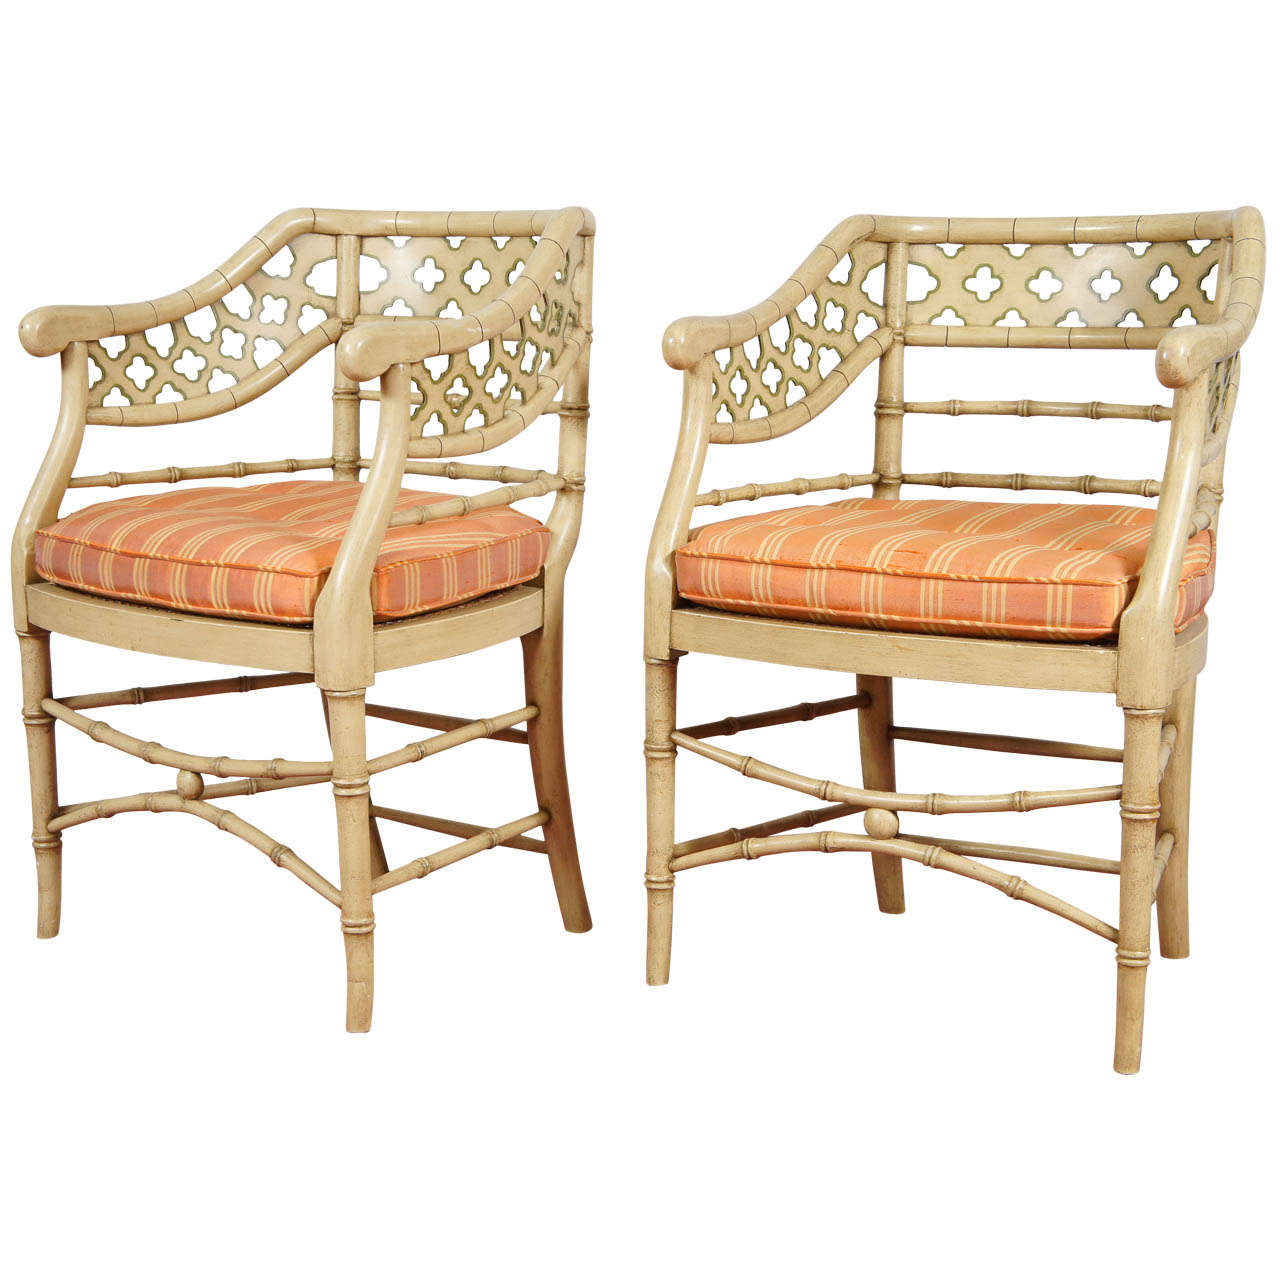 Regency-Style Faux Bamboo Painted Chairs, Pair